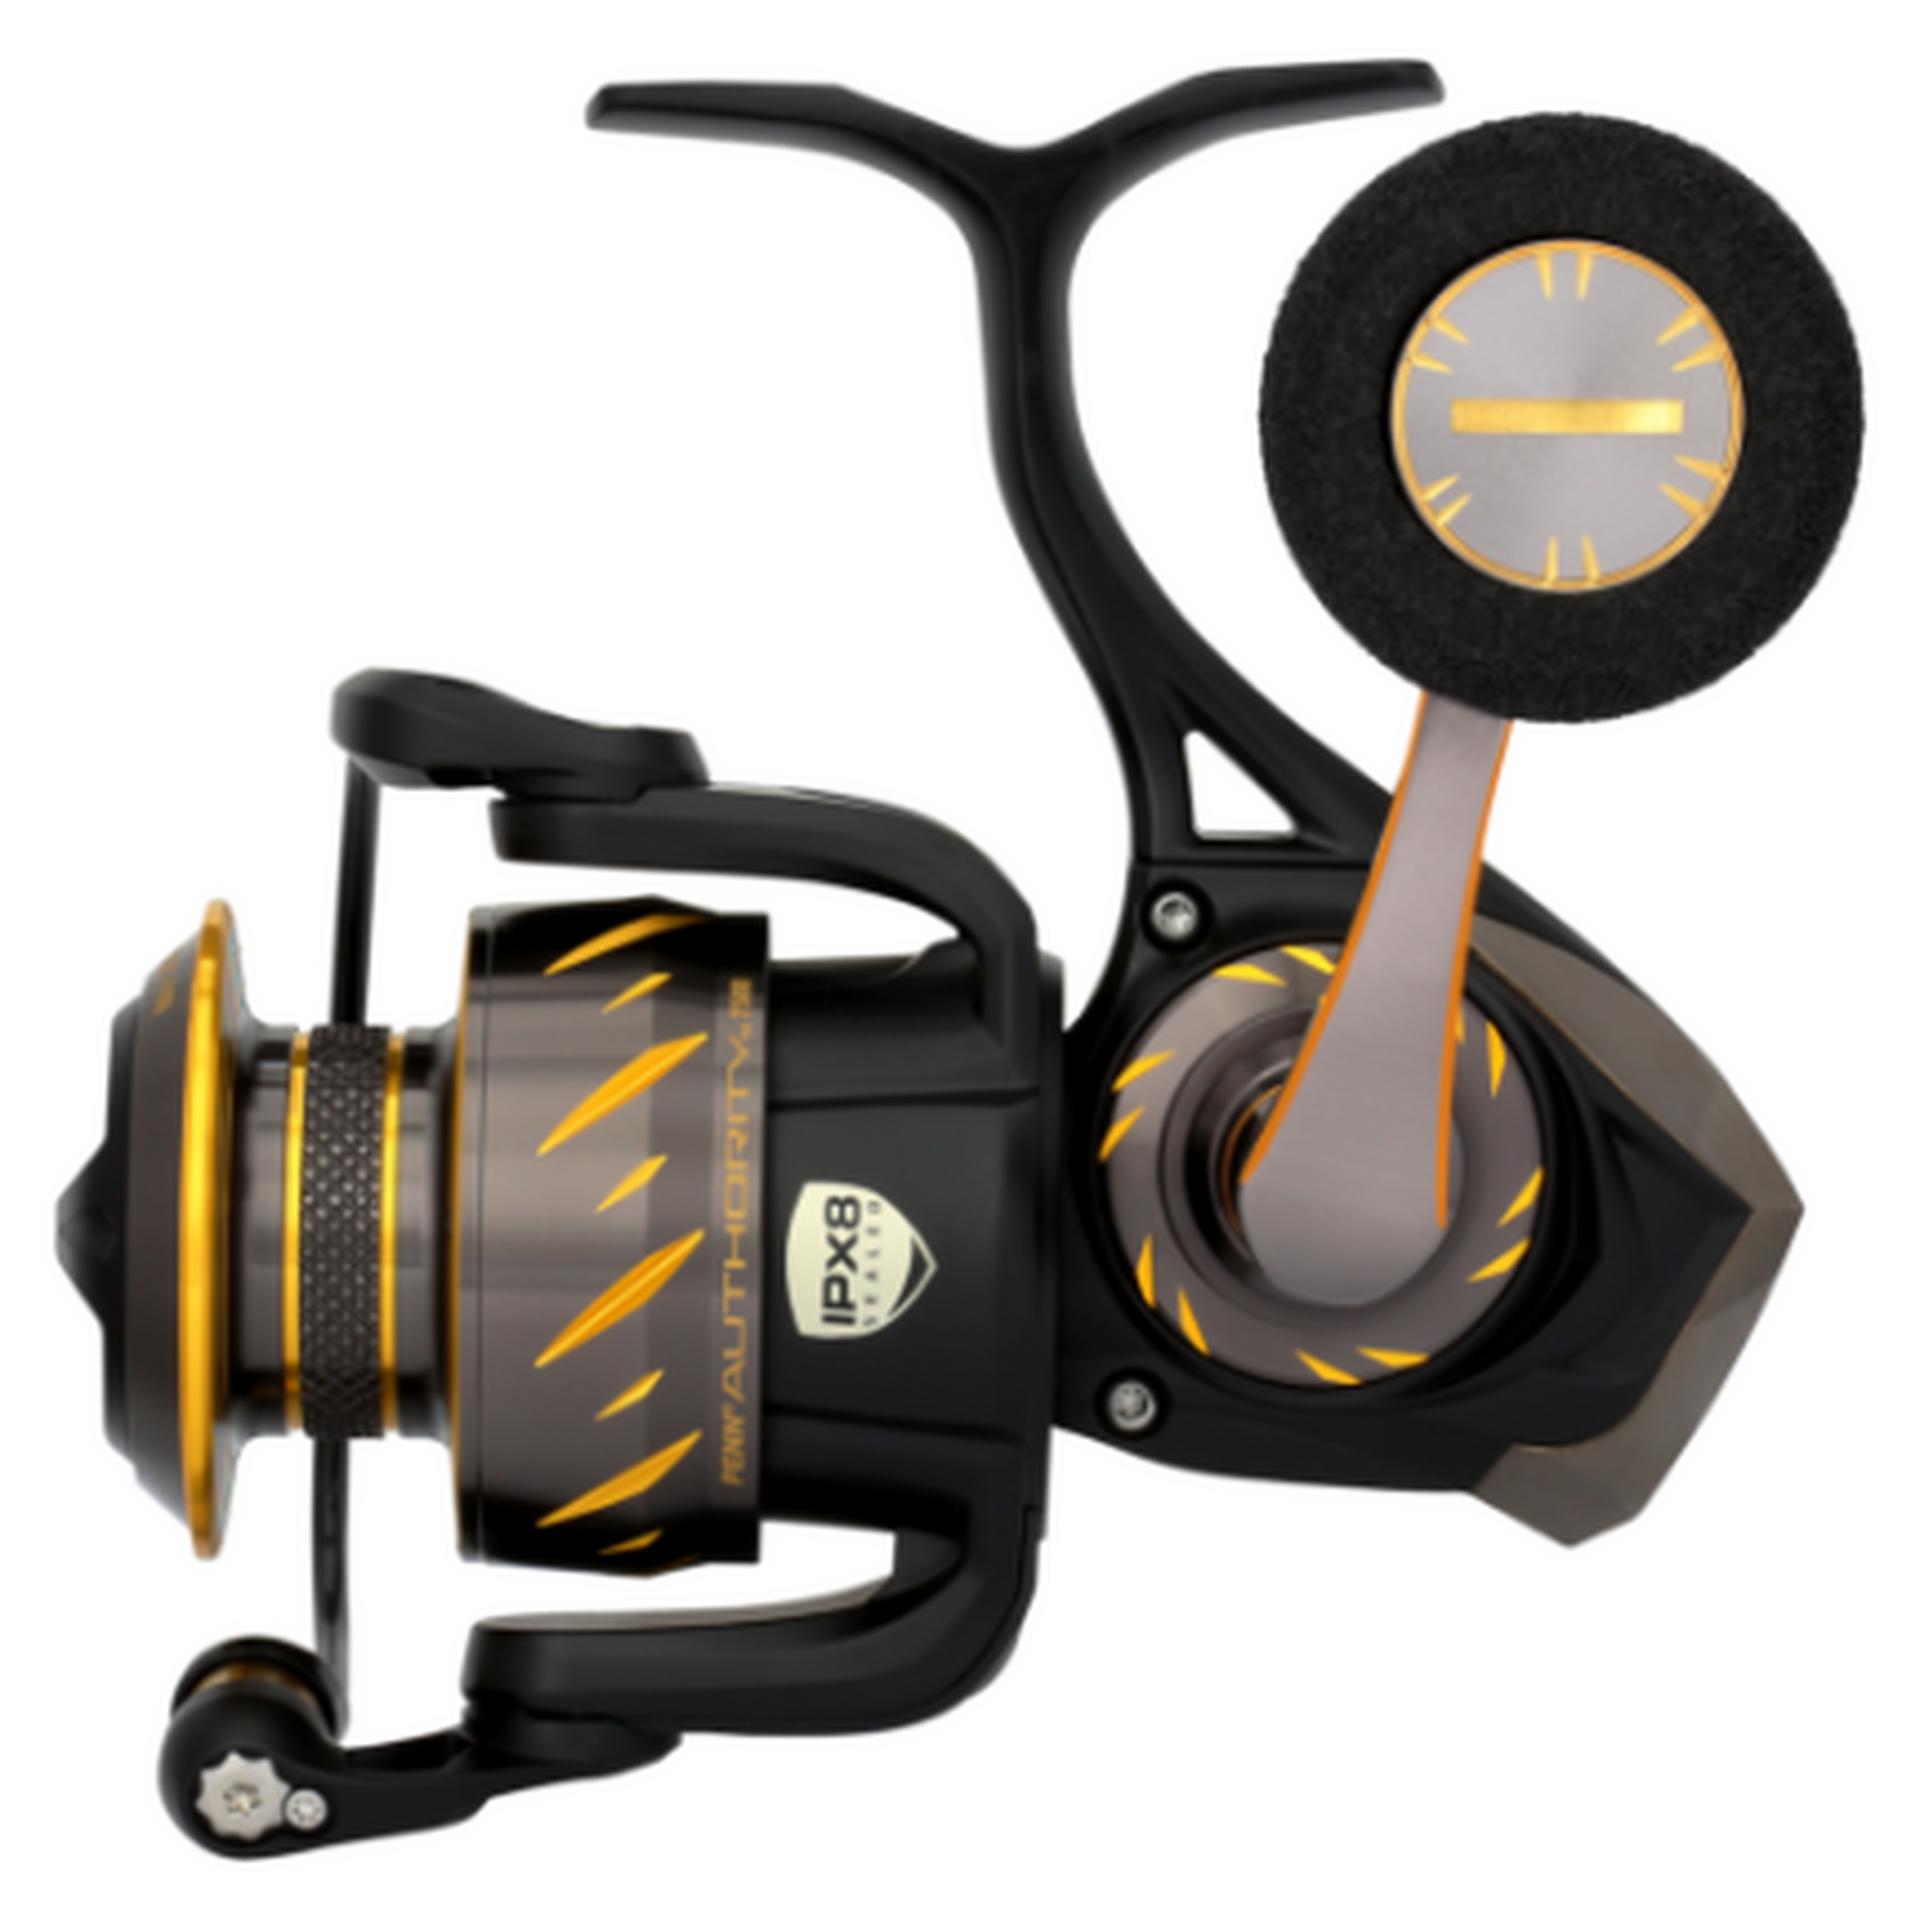 Powerful Ultra Light Spinning Reel for Fishing - Malaysia